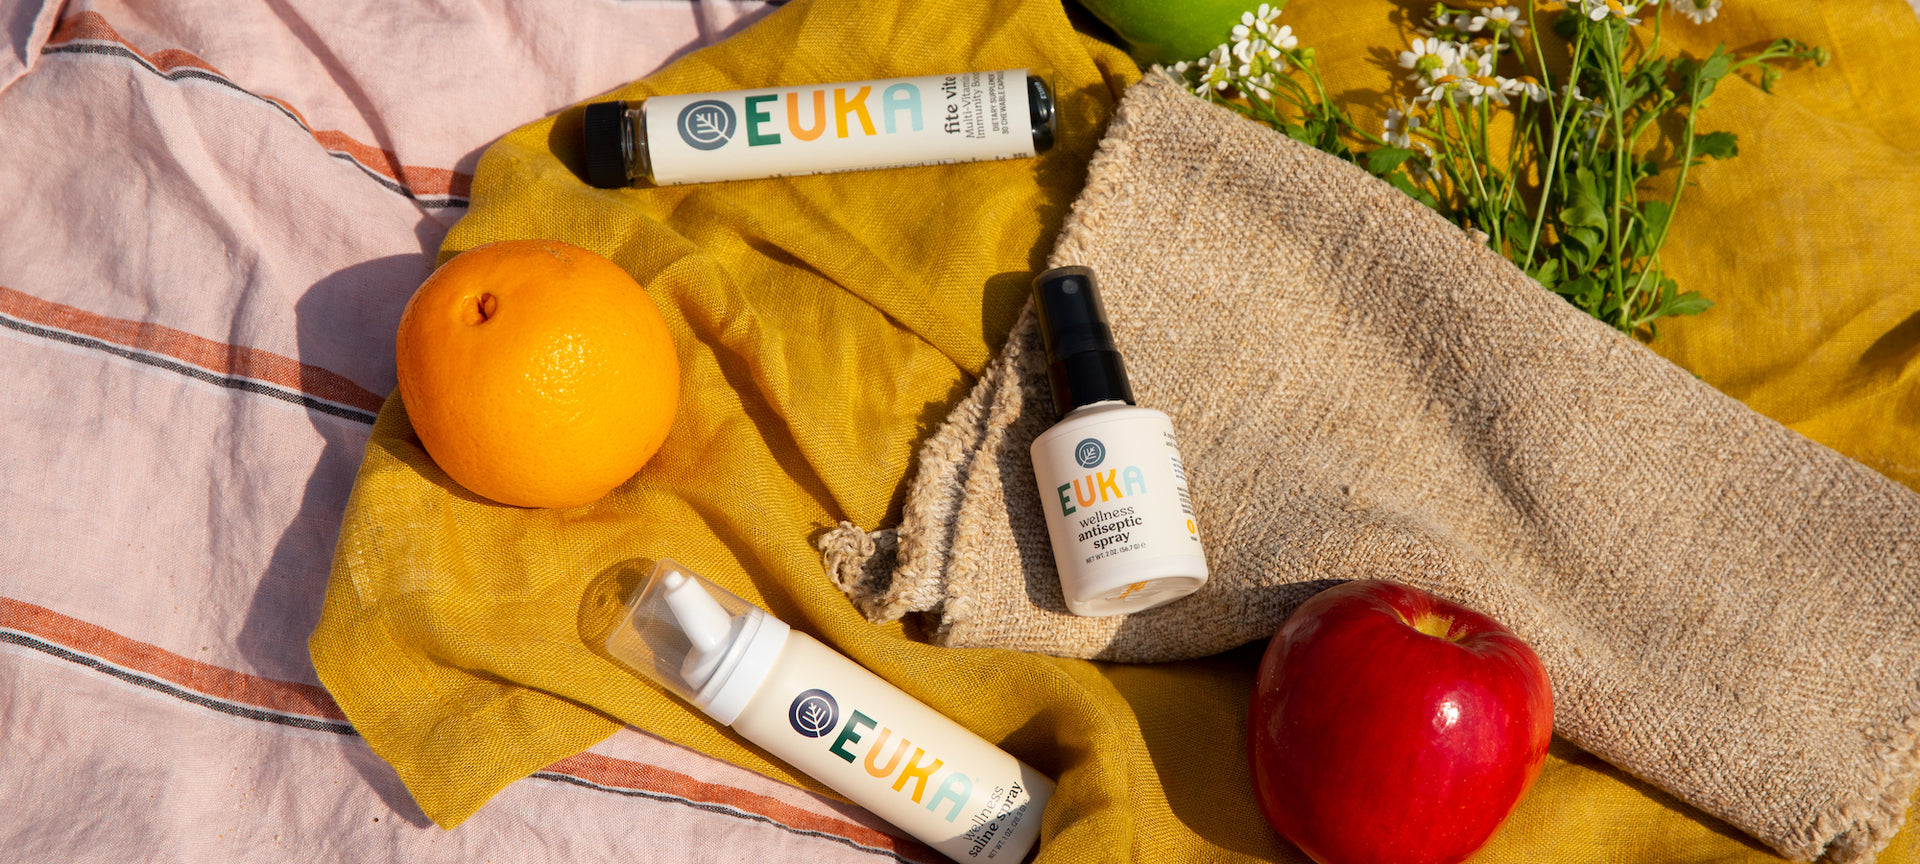 Euka Wellness Antiseptic Spray, Wellness Saline Spray, and Fite Vite laying on a picnic blanket next to an apple